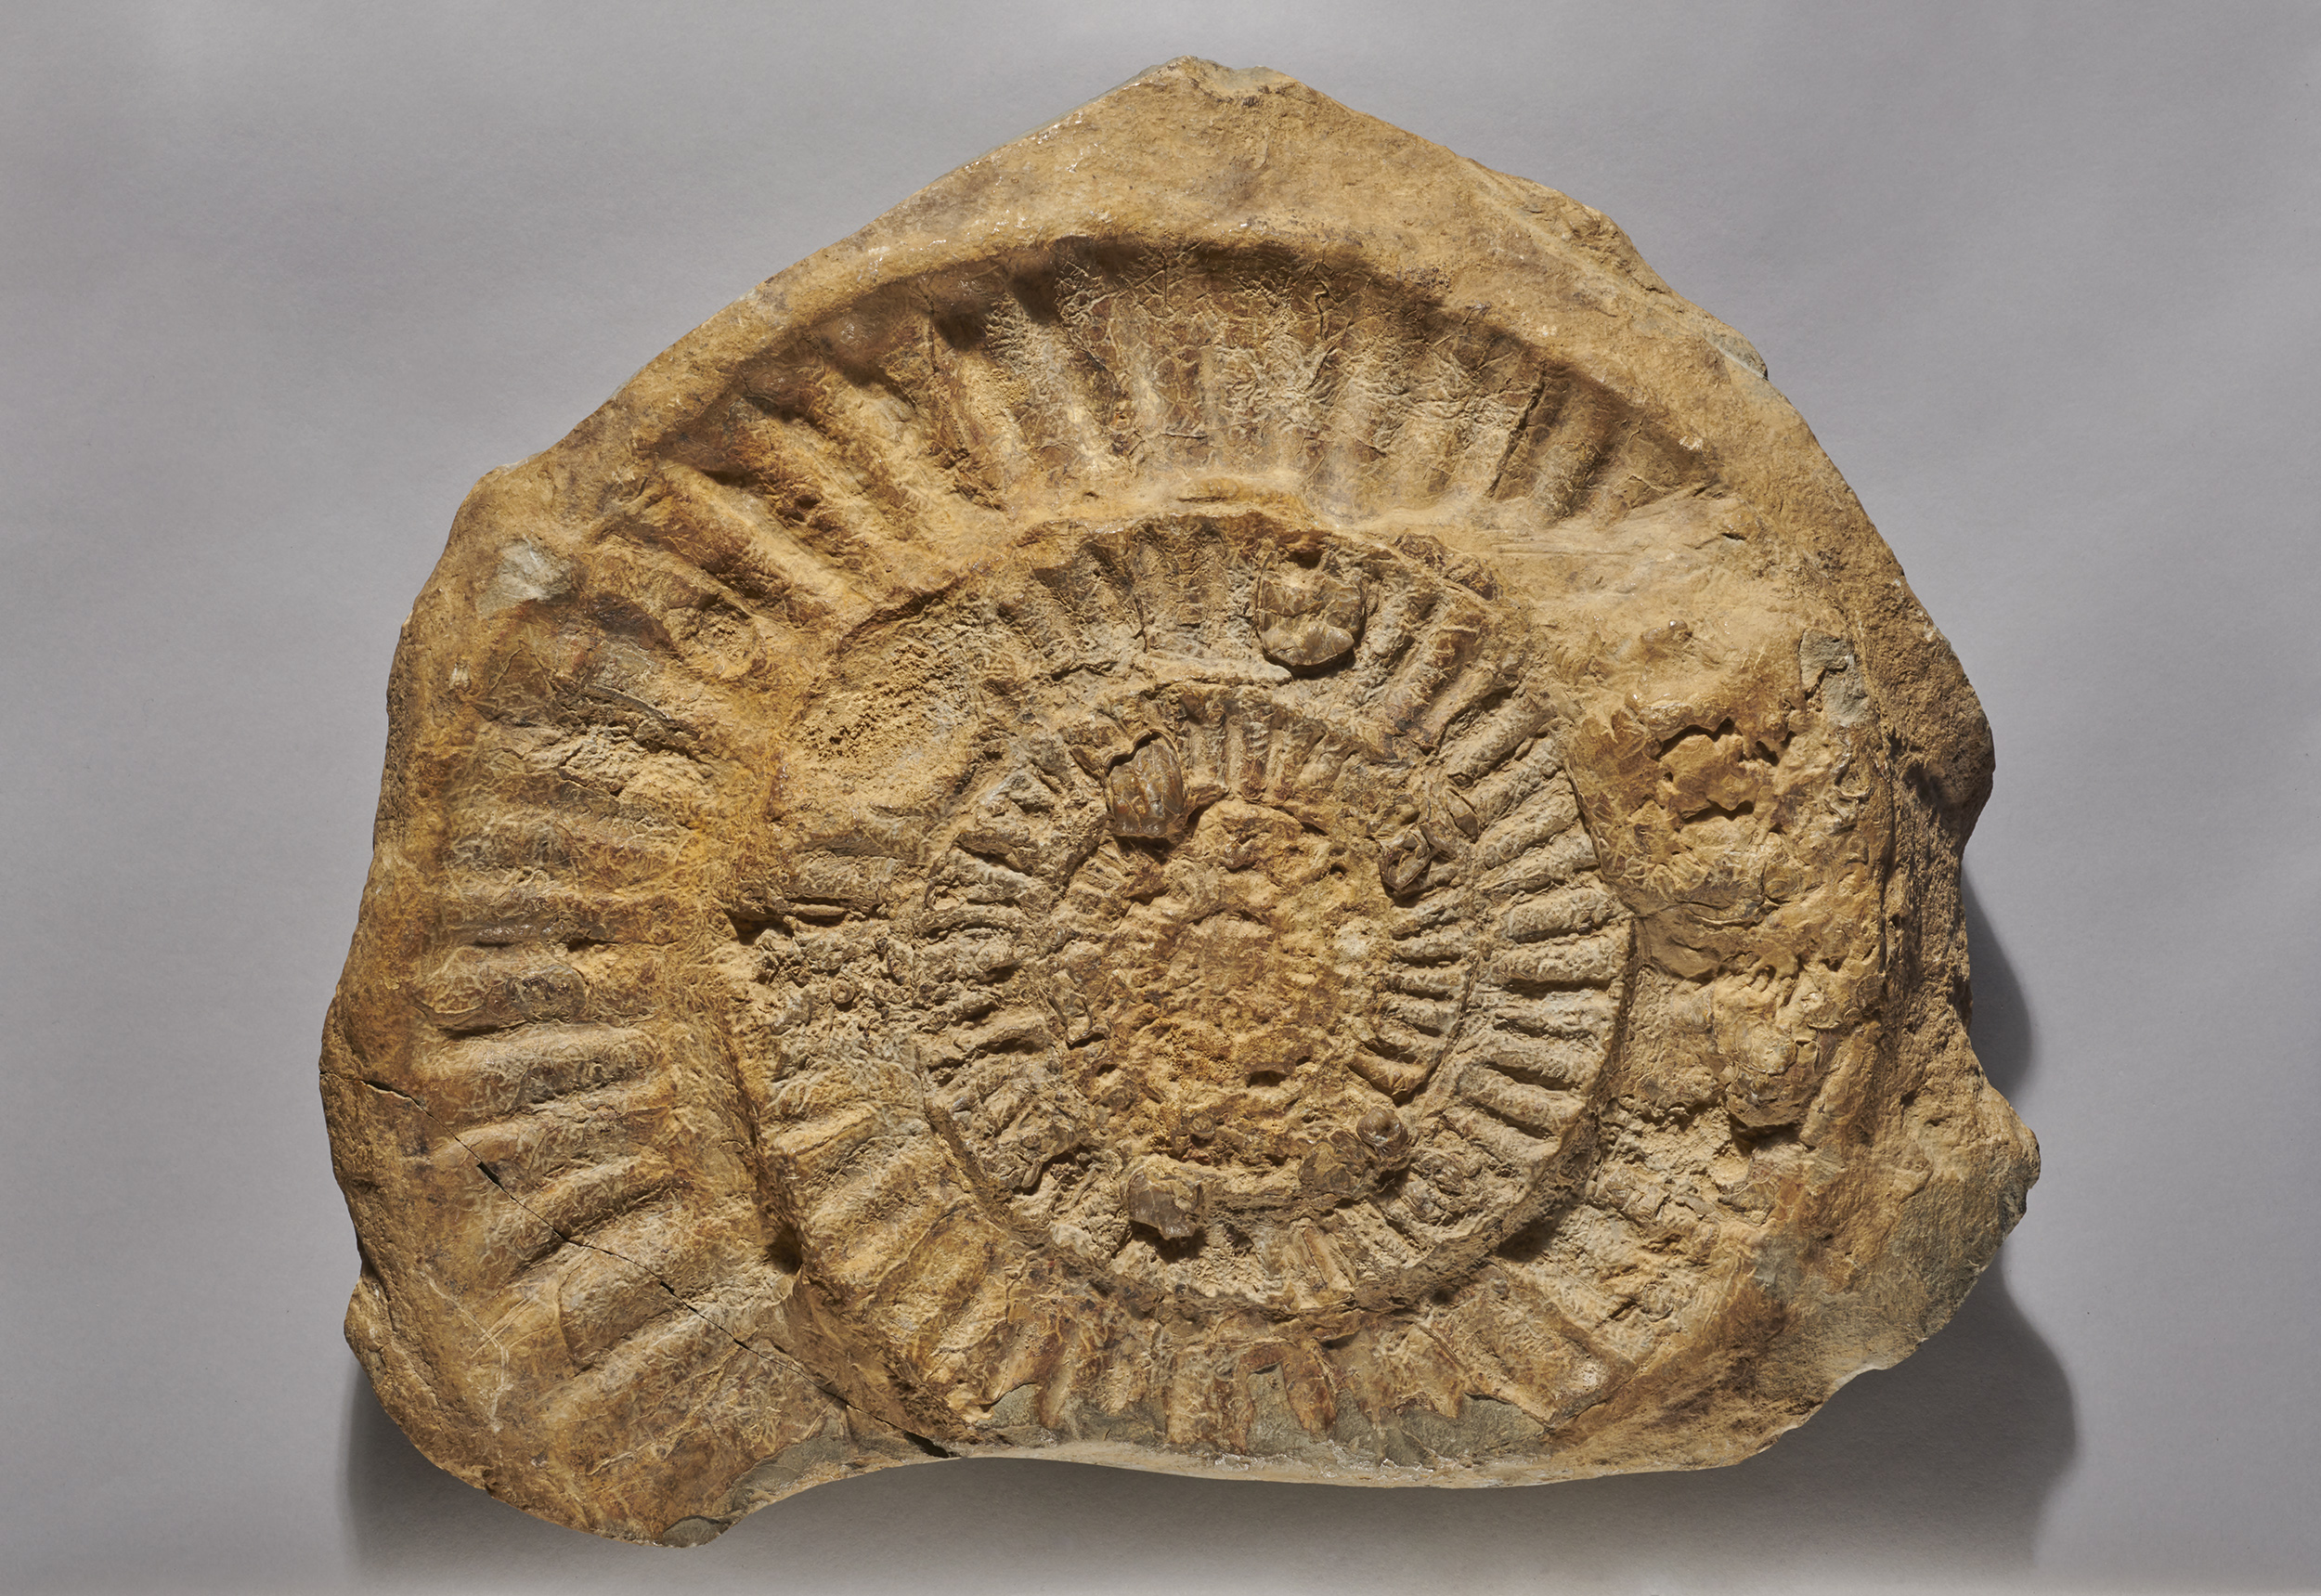 An ammonite fossil from the Herbert Art Gallery & Museum's permanent collection